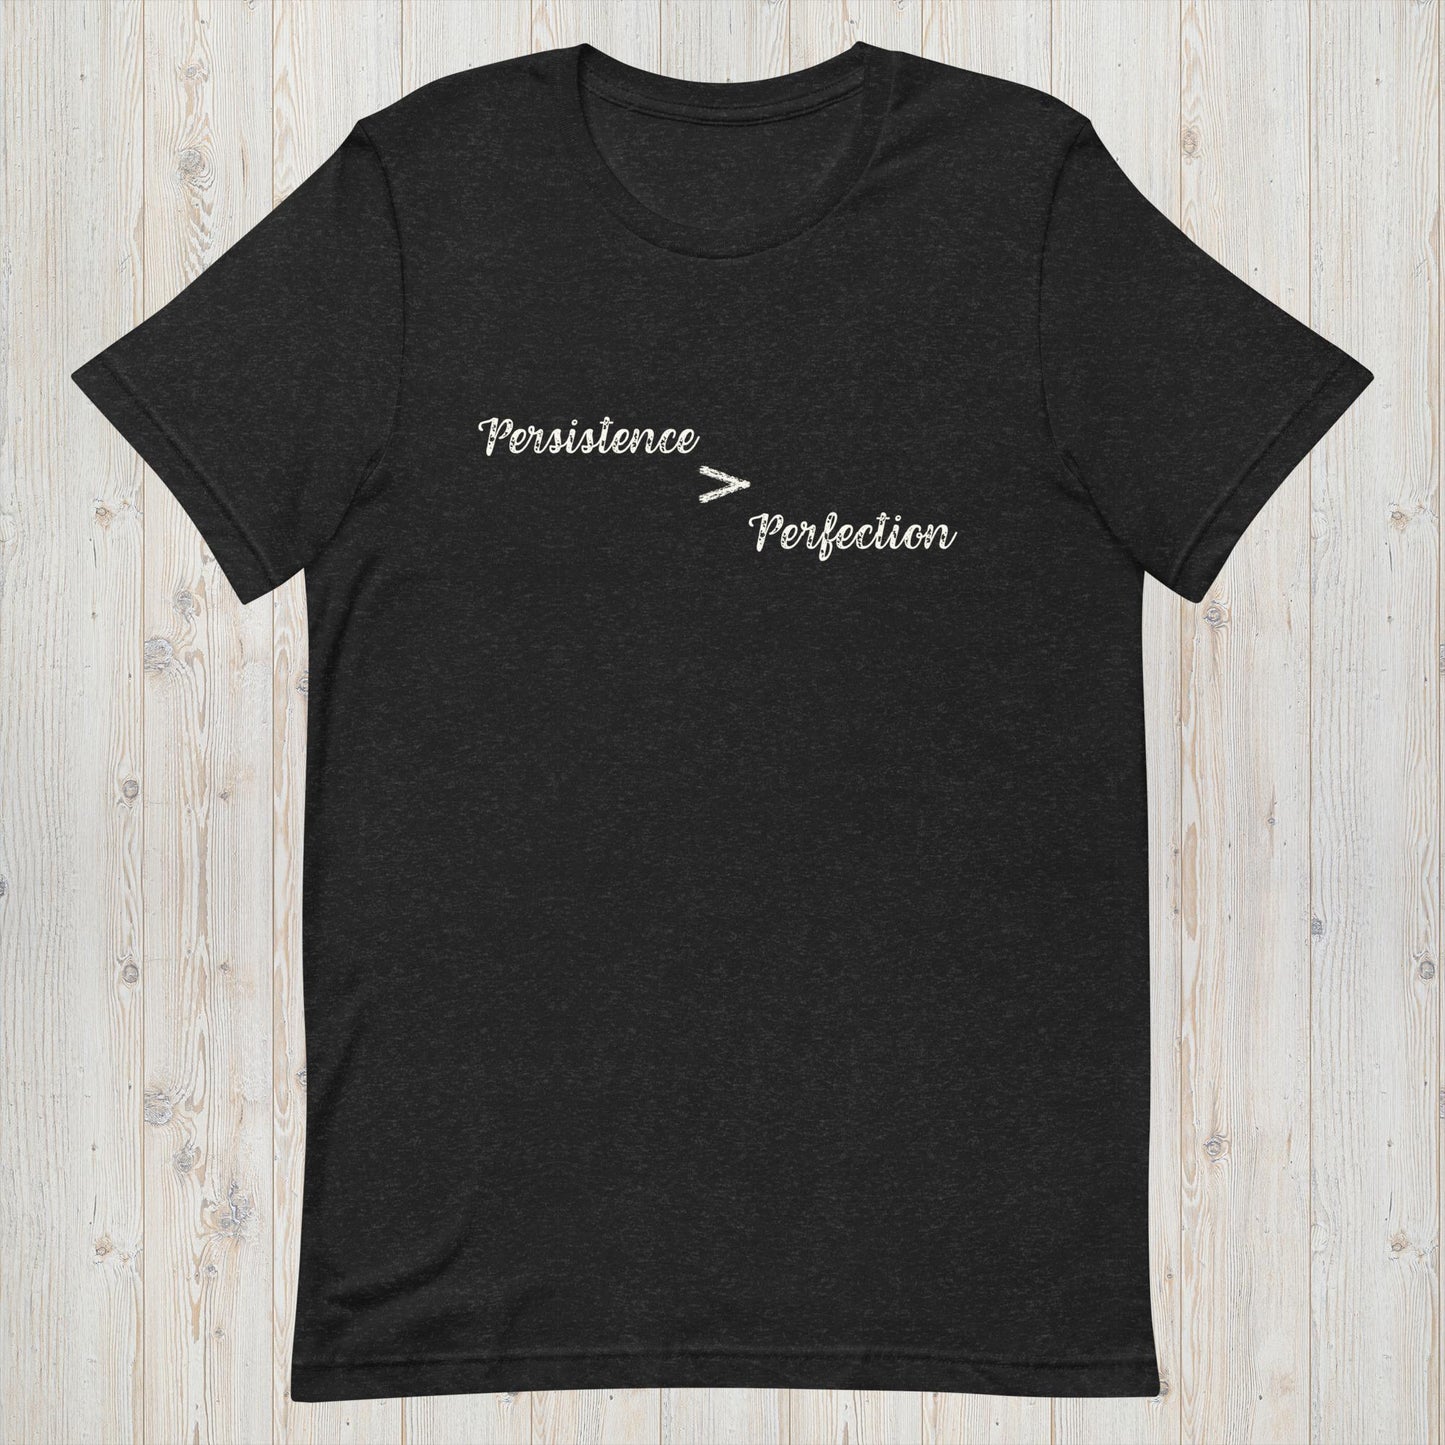 Persistence is Greater Than Perfection Motivational T-Shirt